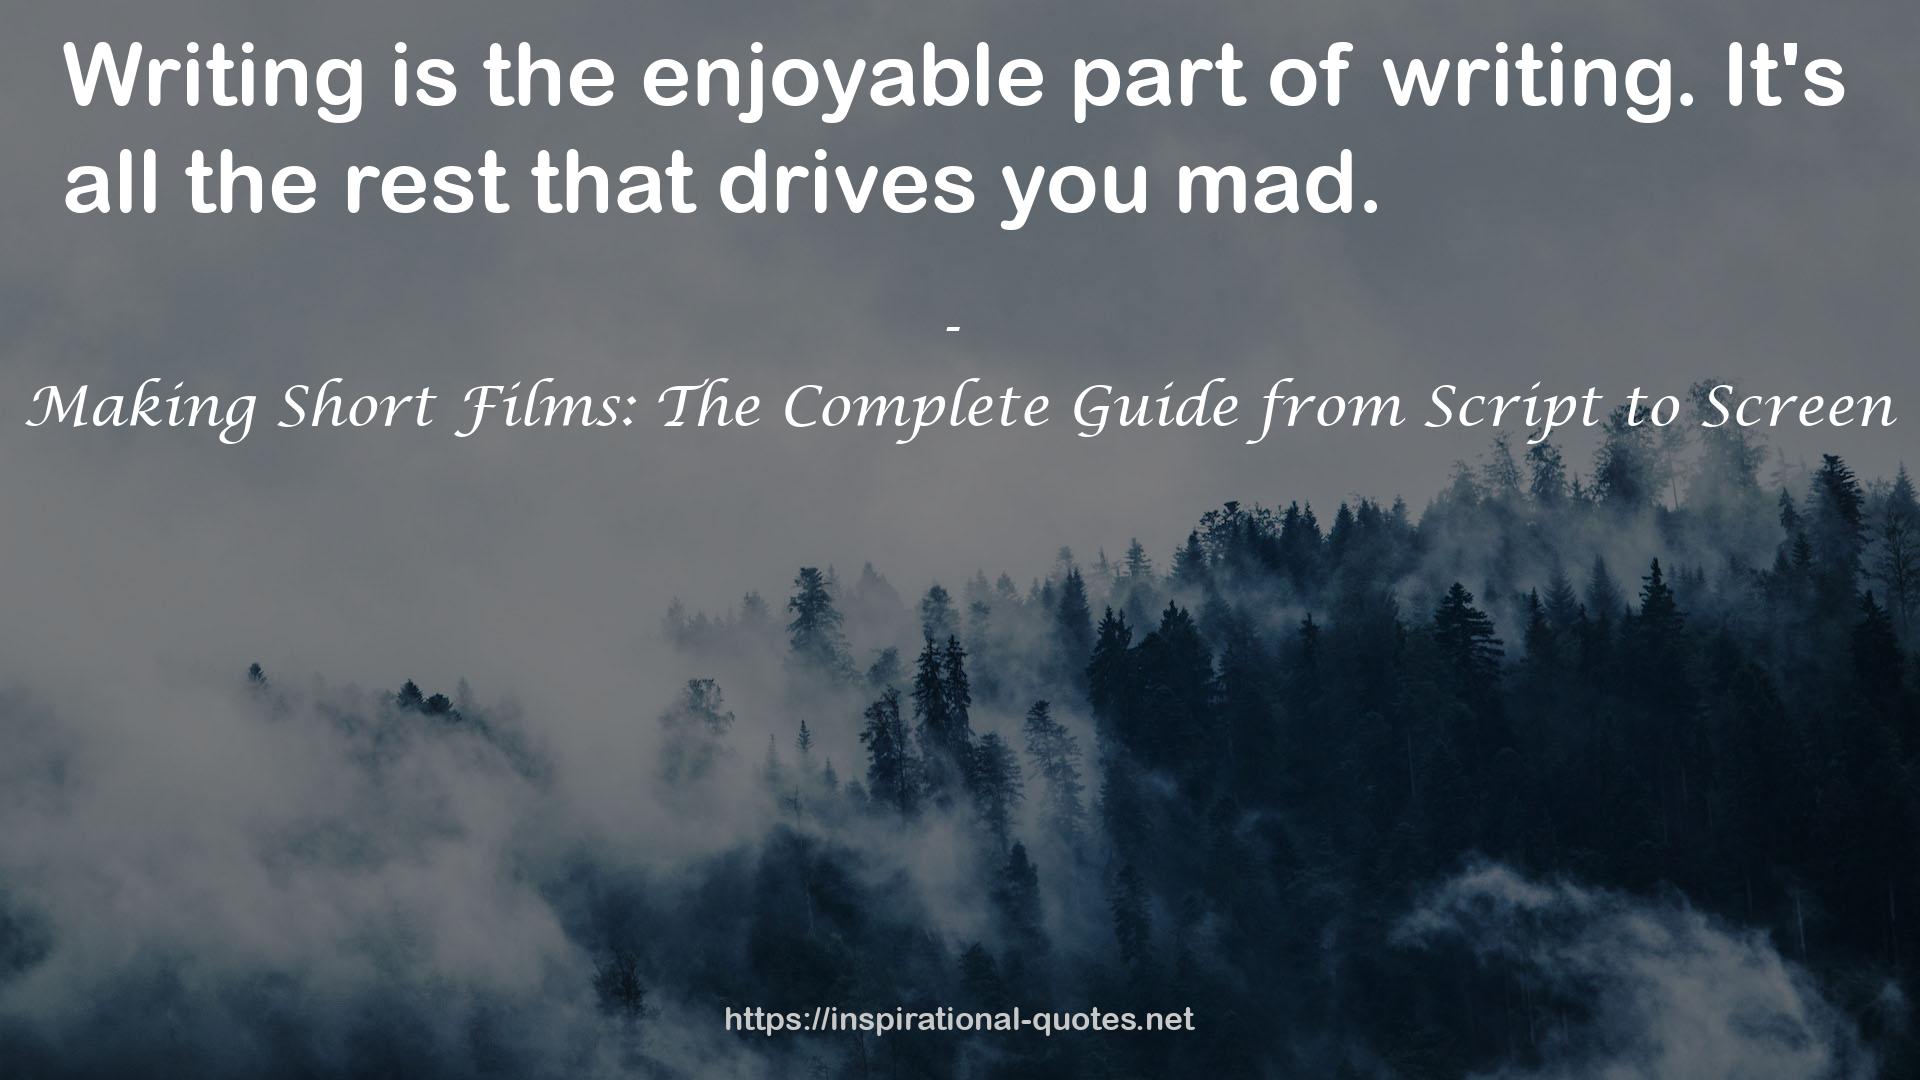 Making Short Films: The Complete Guide from Script to Screen QUOTES